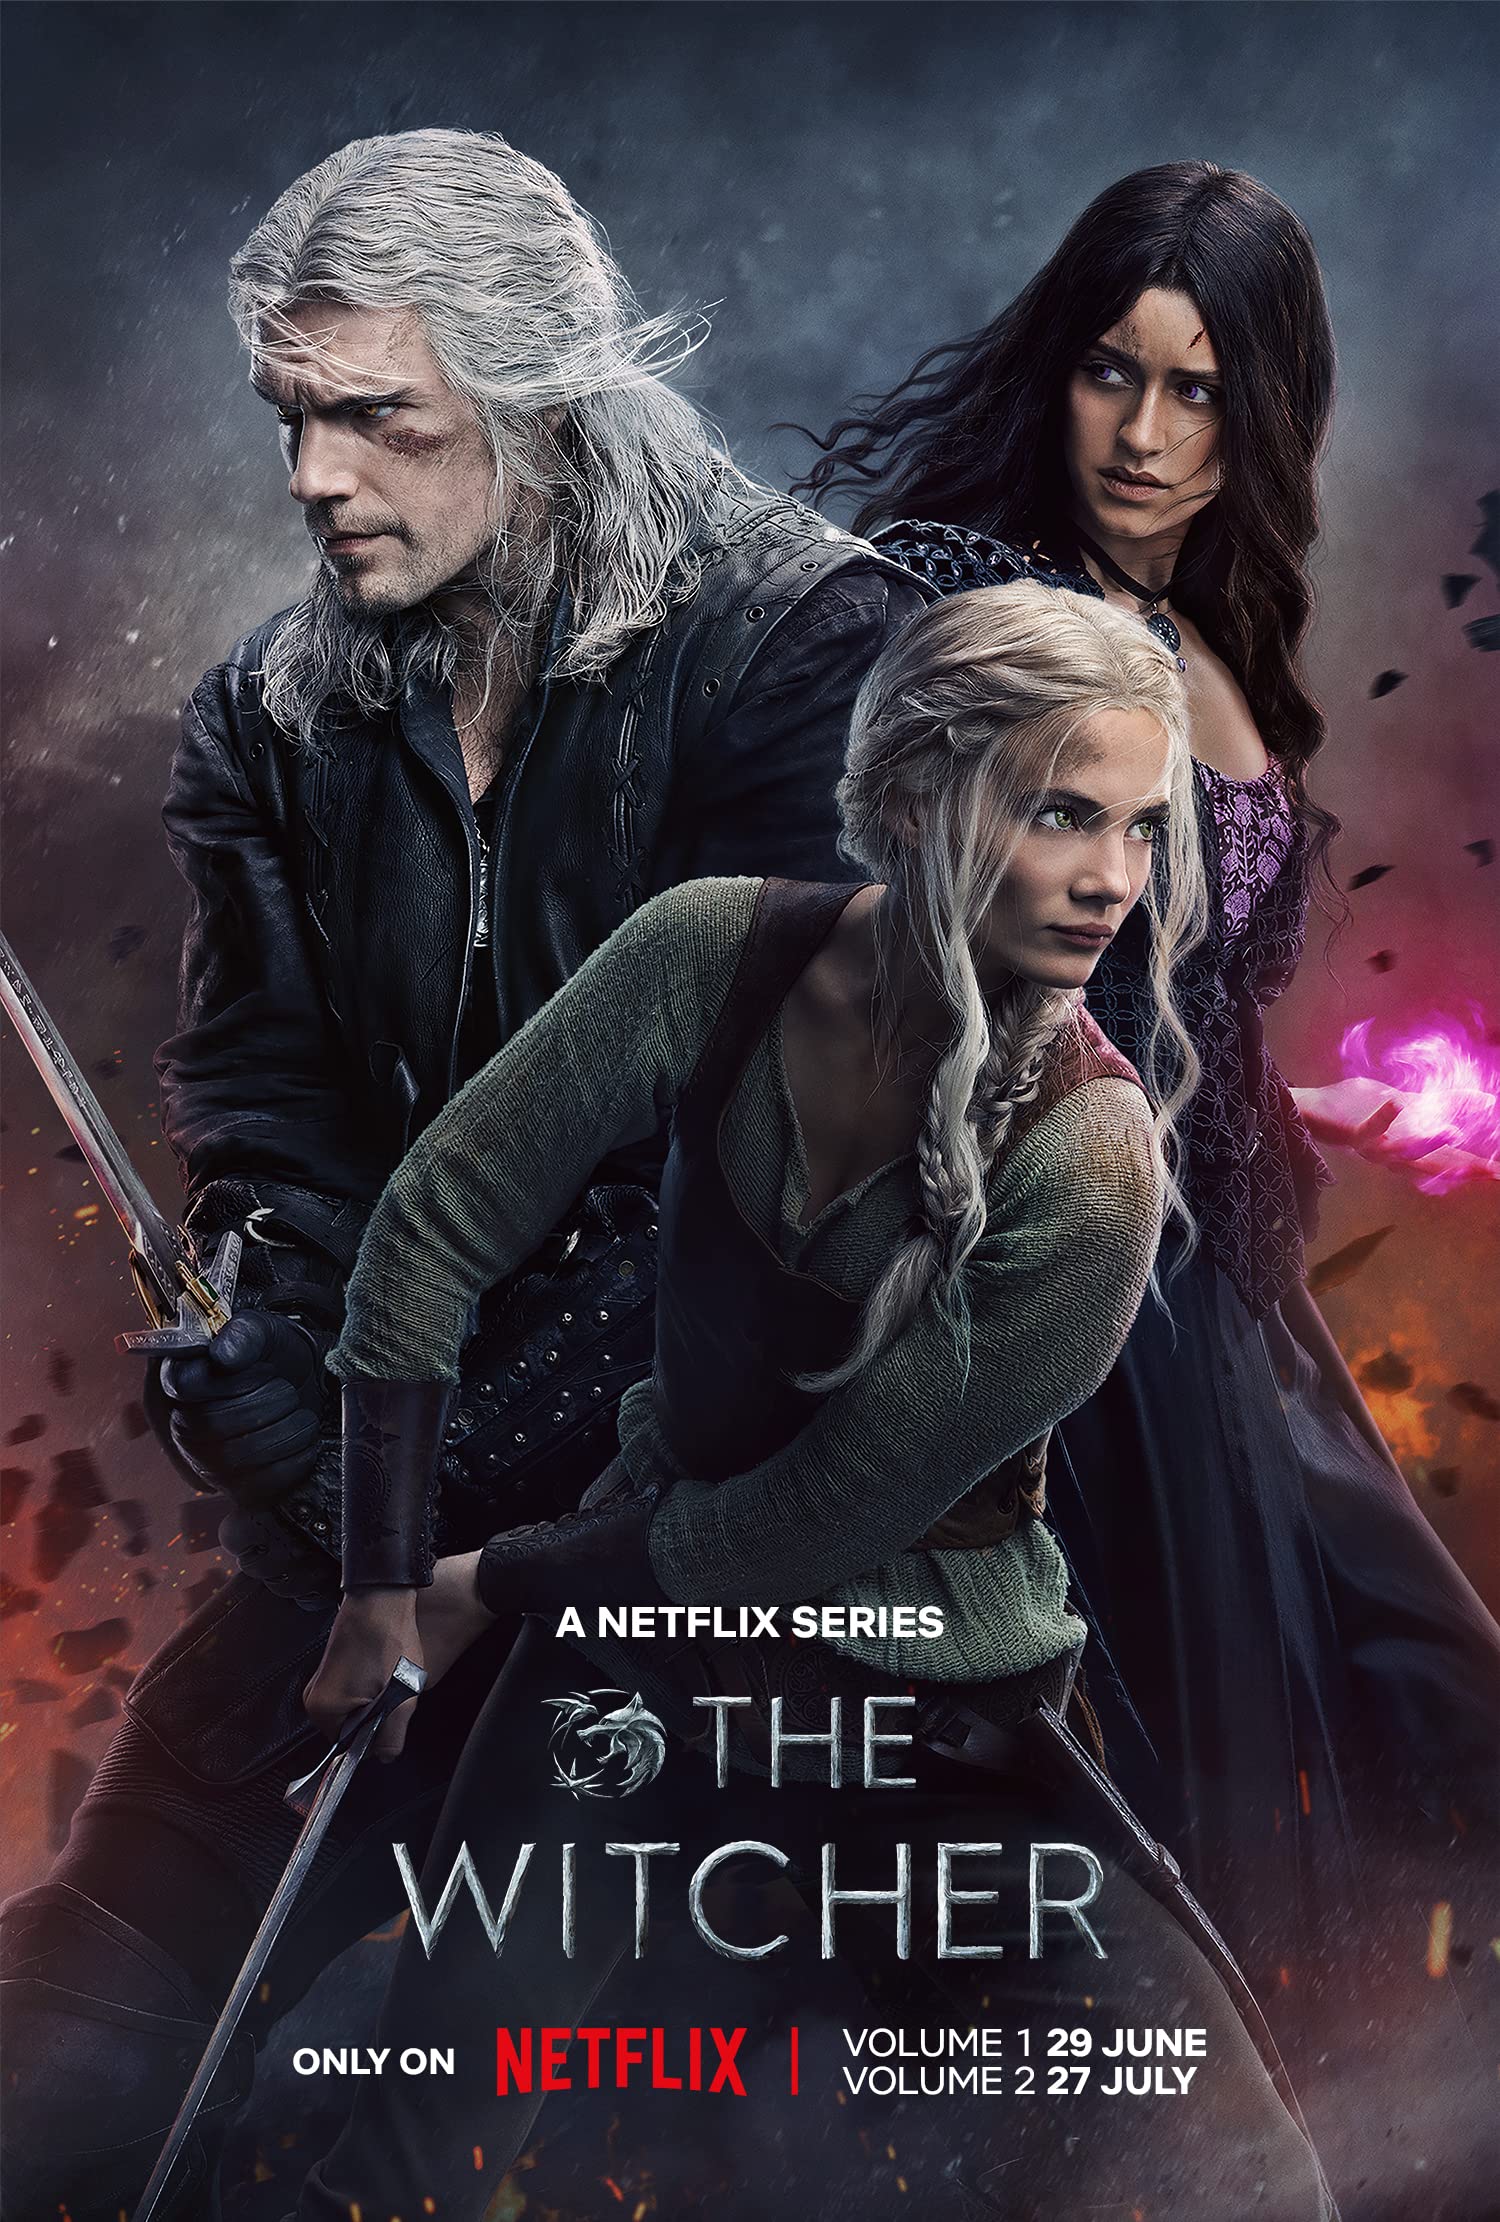 The Witcher - (2019 show) image